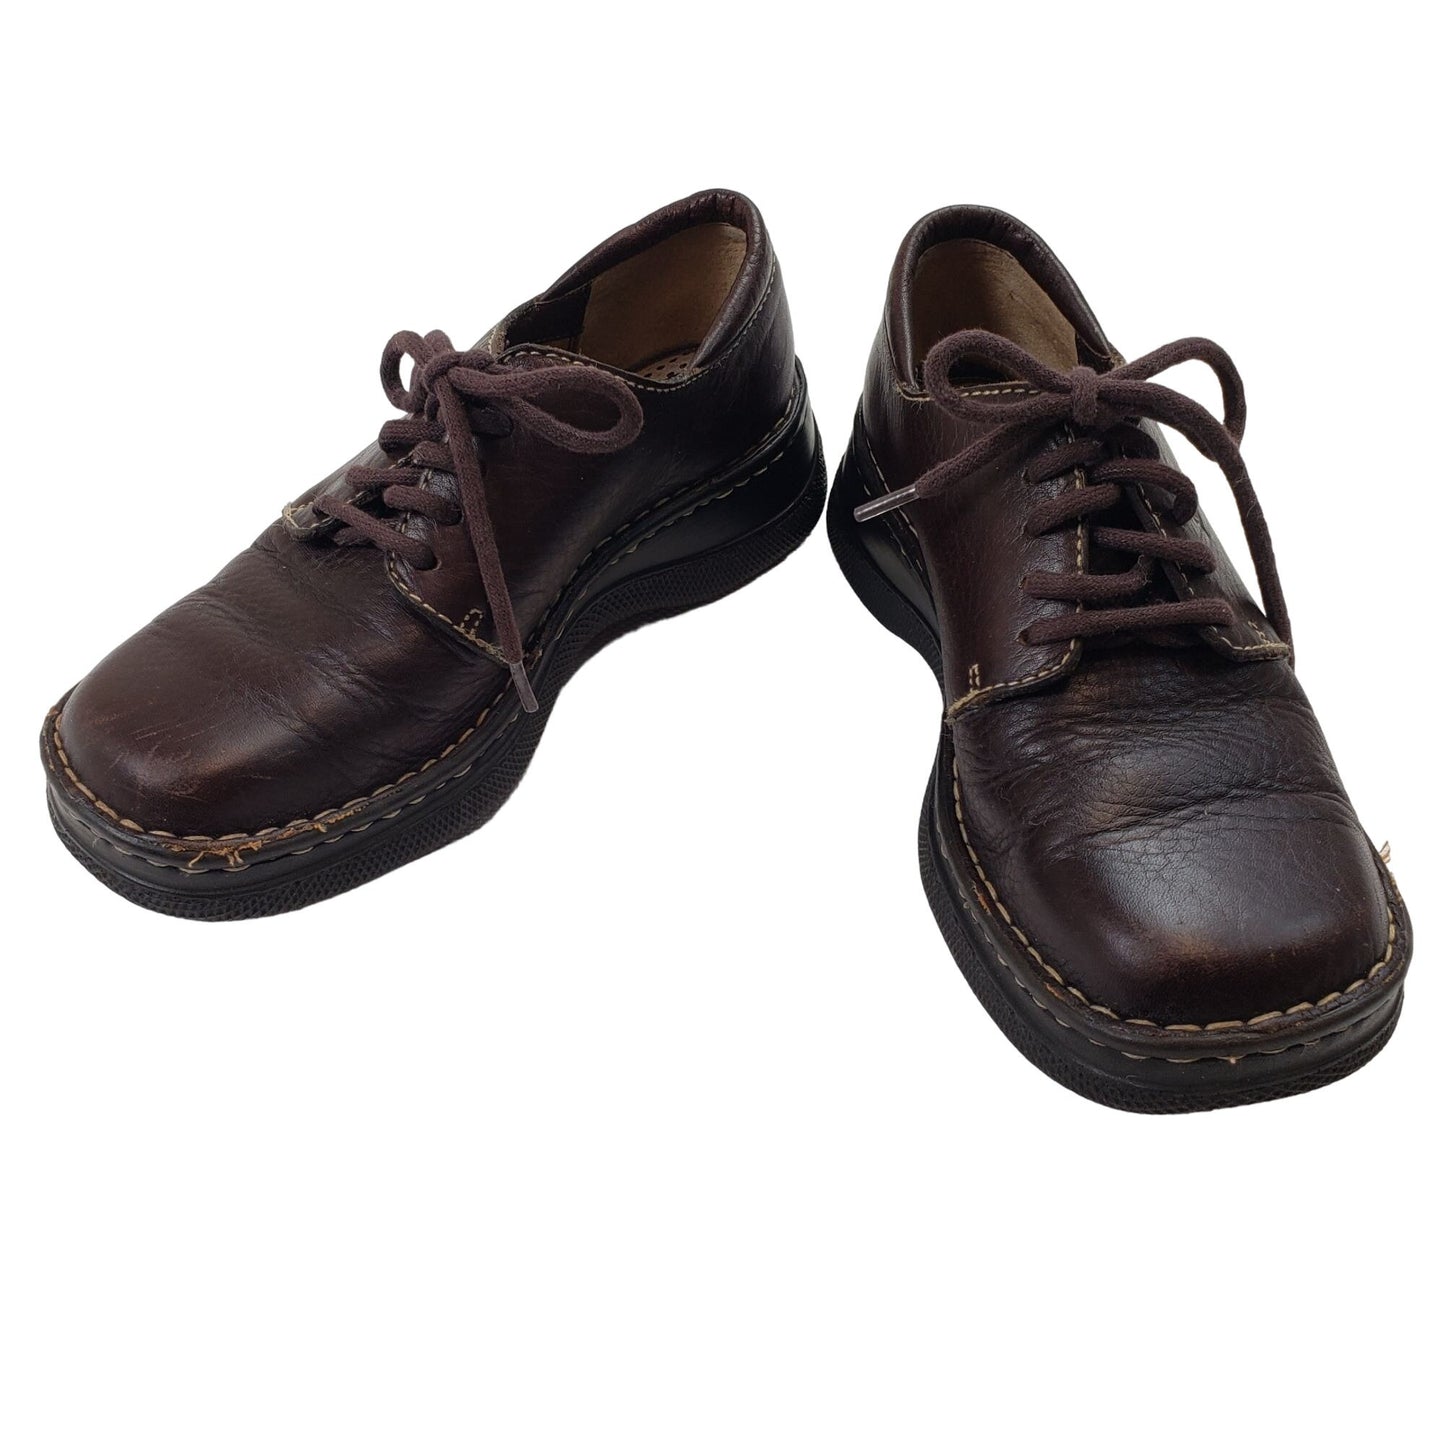 Born Classic Oxford Leather Lace-Up Shoes Size 6